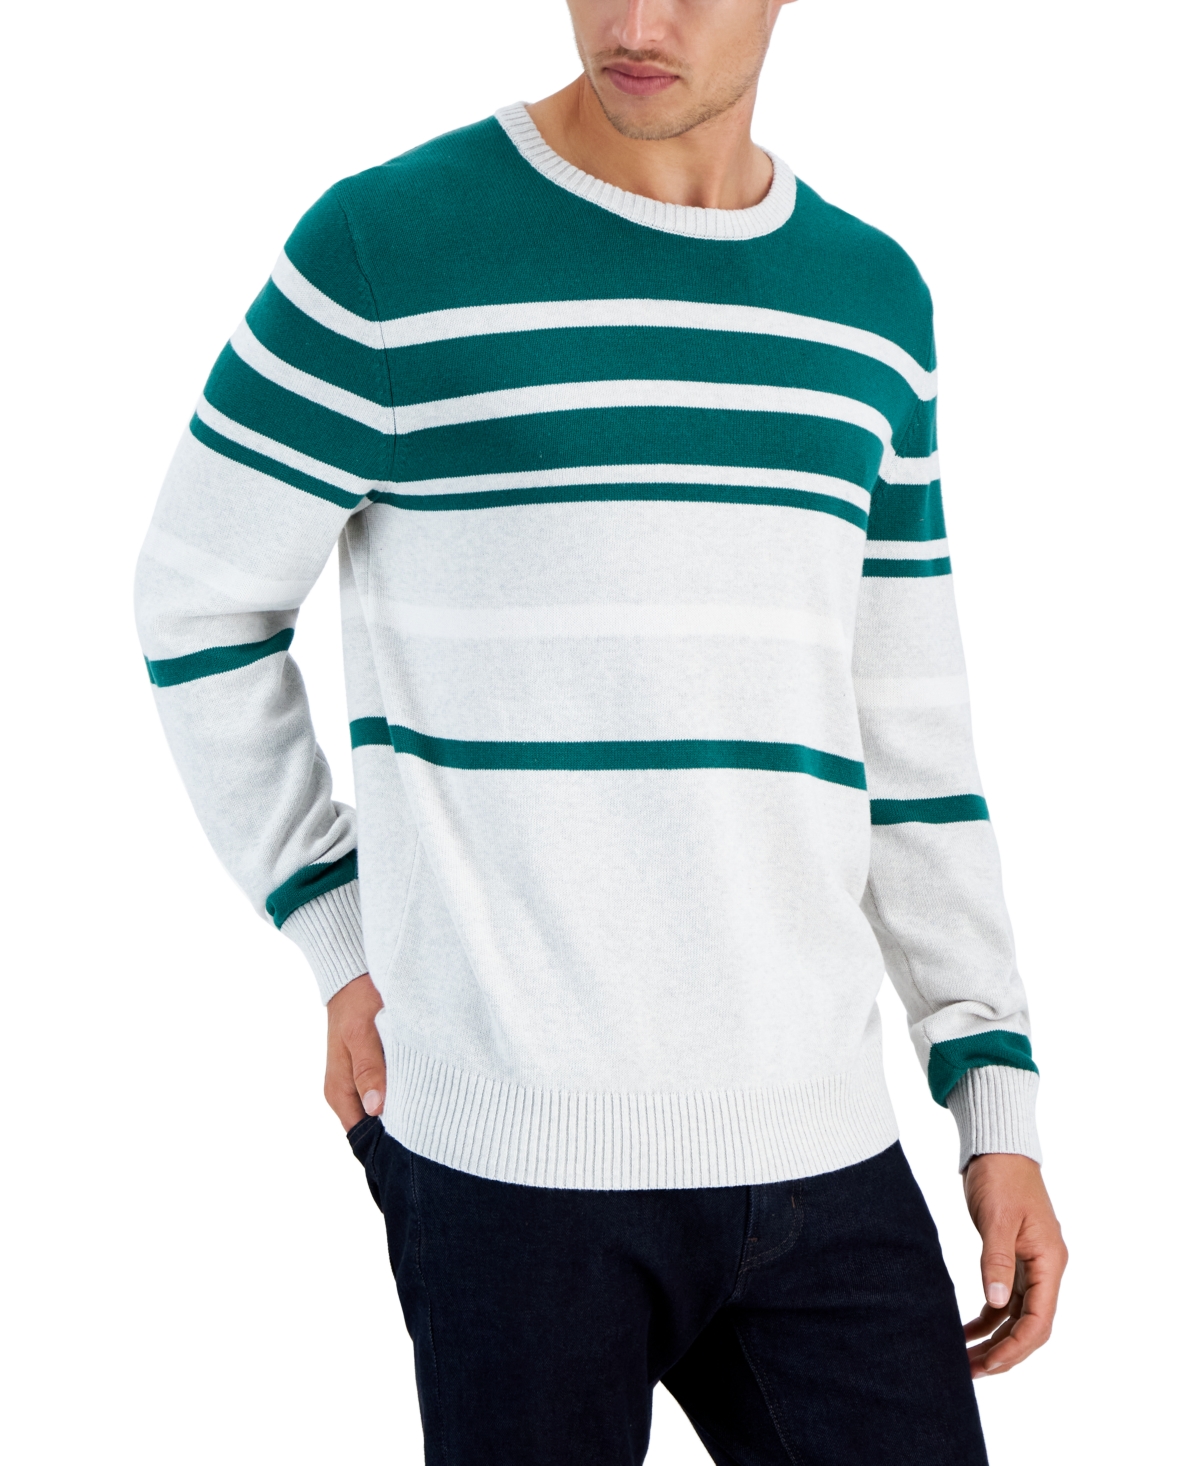 Men's Vary Striped Sweater, Created for Macy's - Spruce Up